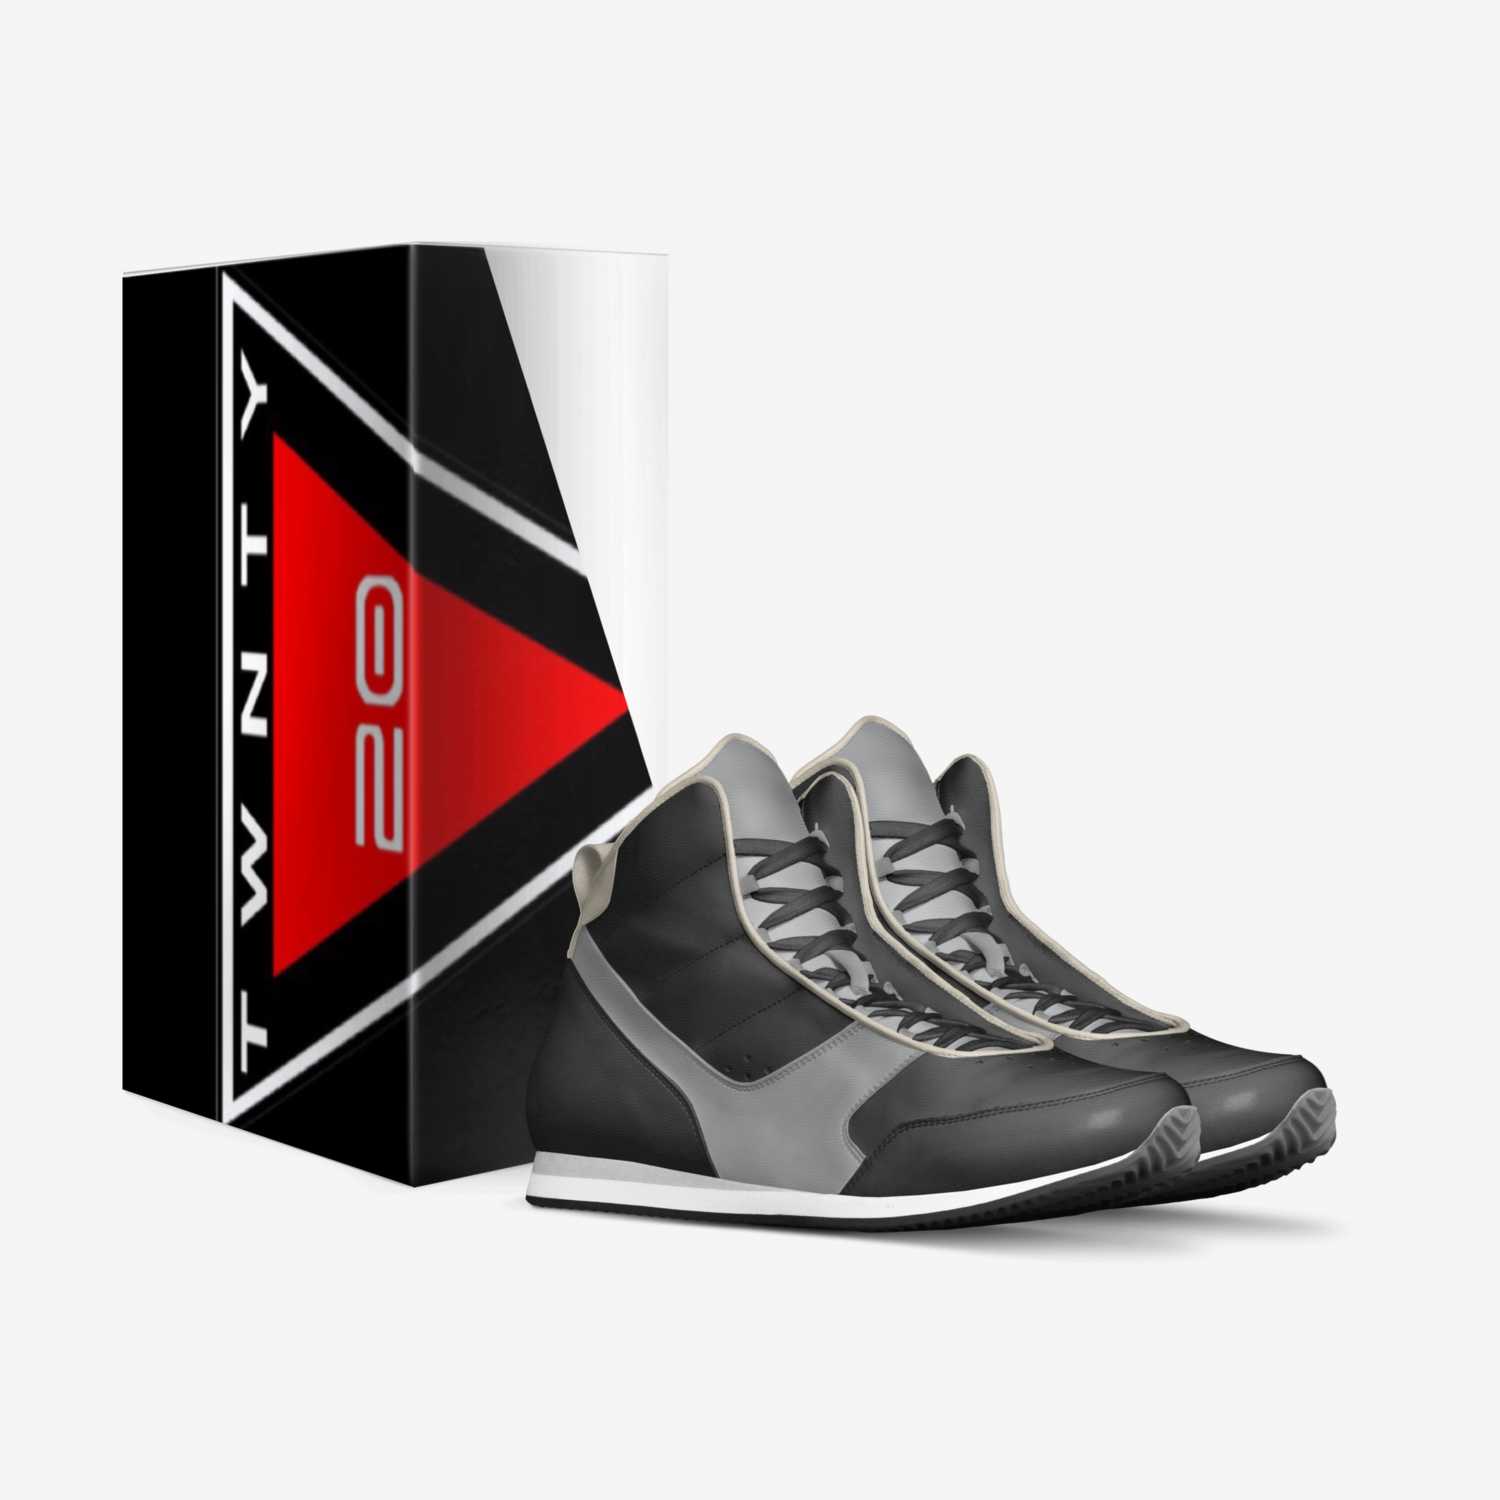 LXR 520  custom made in Italy shoes by Kvn Elvn | Box view